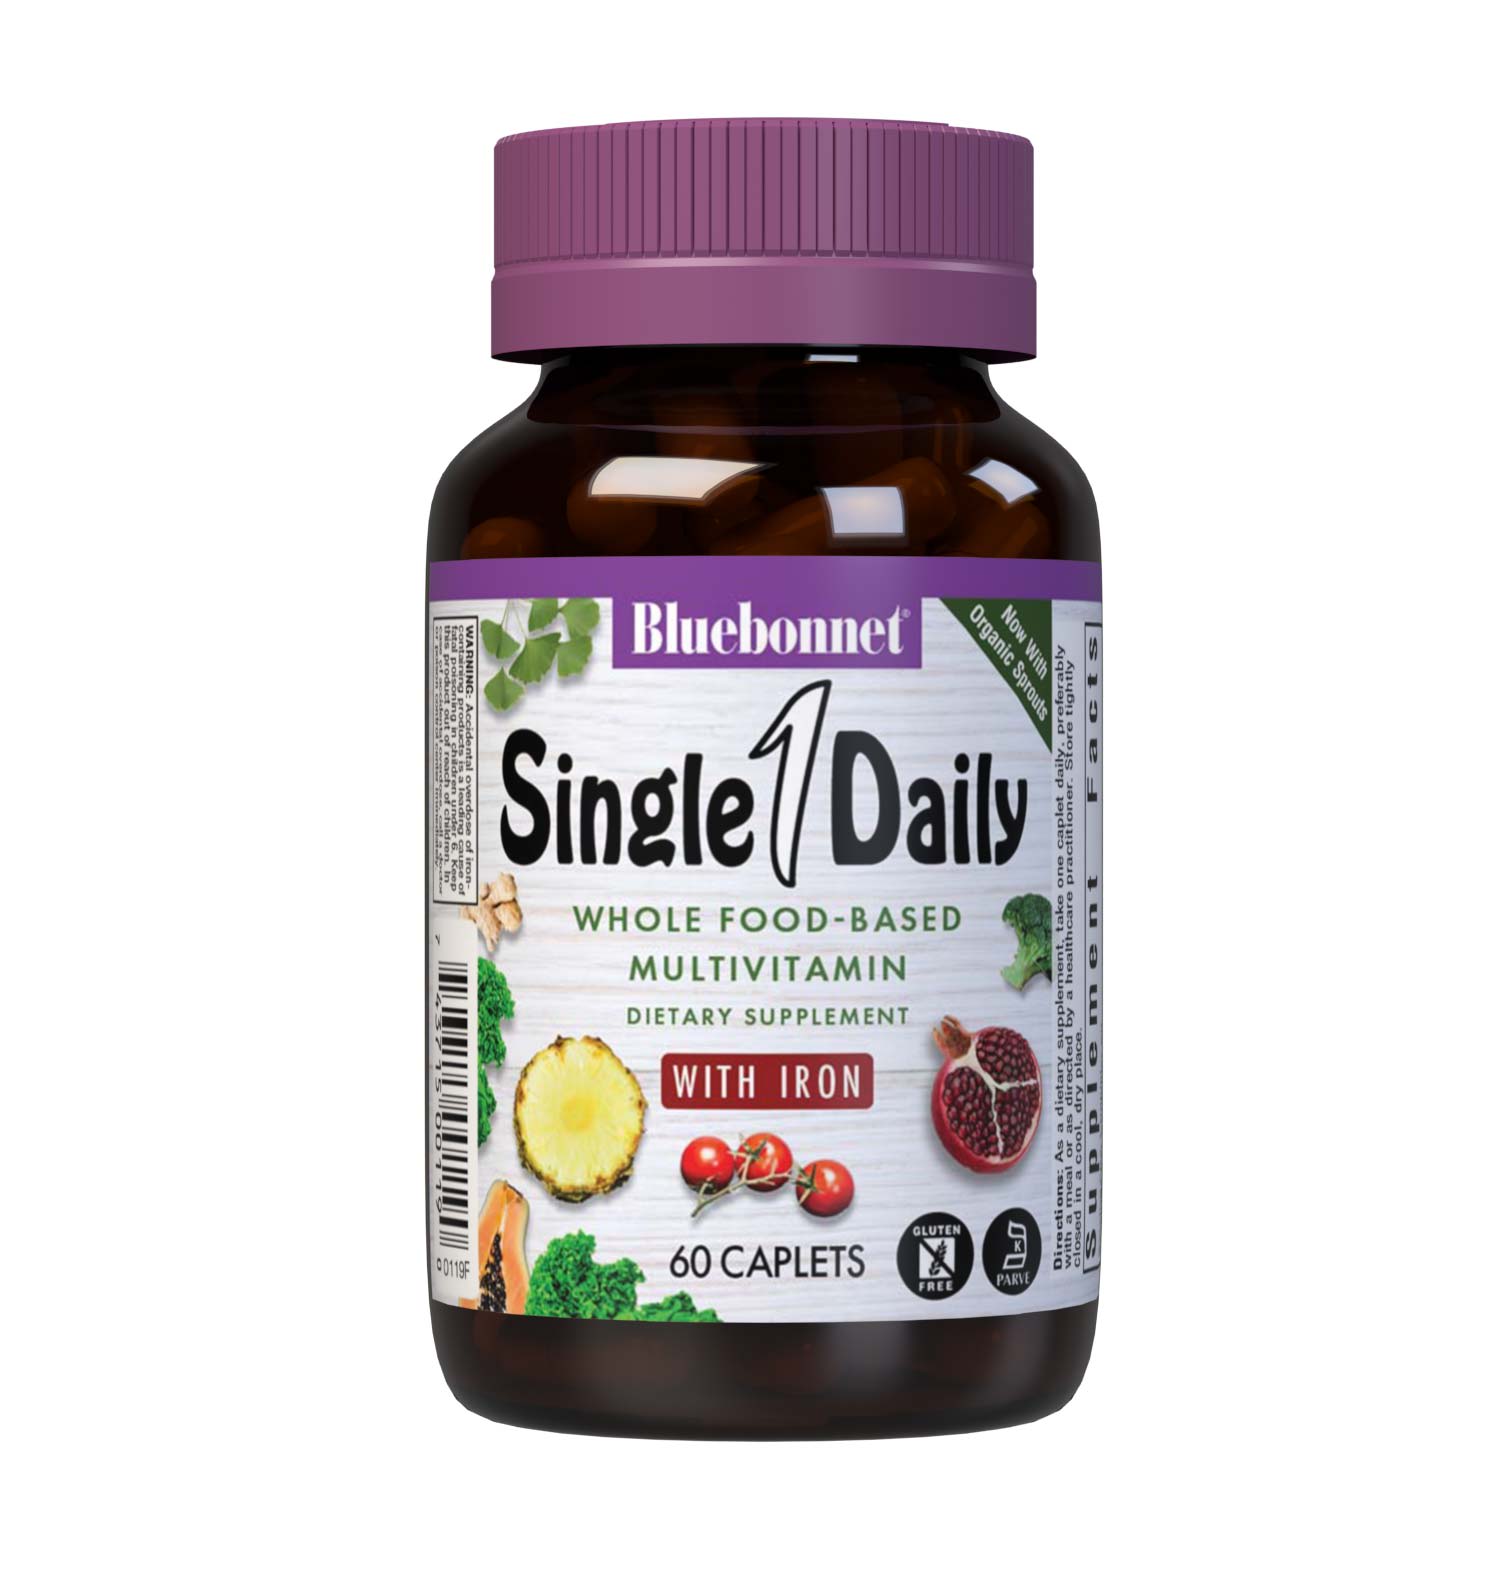 SingleDaily Multiple (With Free) 60 caplets whole food-based formula offers essential vitamins, minerals and enzymes from unique, kosher-certified, plant-based ingredients, such as adaptogenic and immune-boosting herbs, greens from nutrient-dense spirulina, chlorella and chlorophyll, lycopene from tomatoes and potent anti-aging antioxidants from pomegranate fruit. #size_60 count